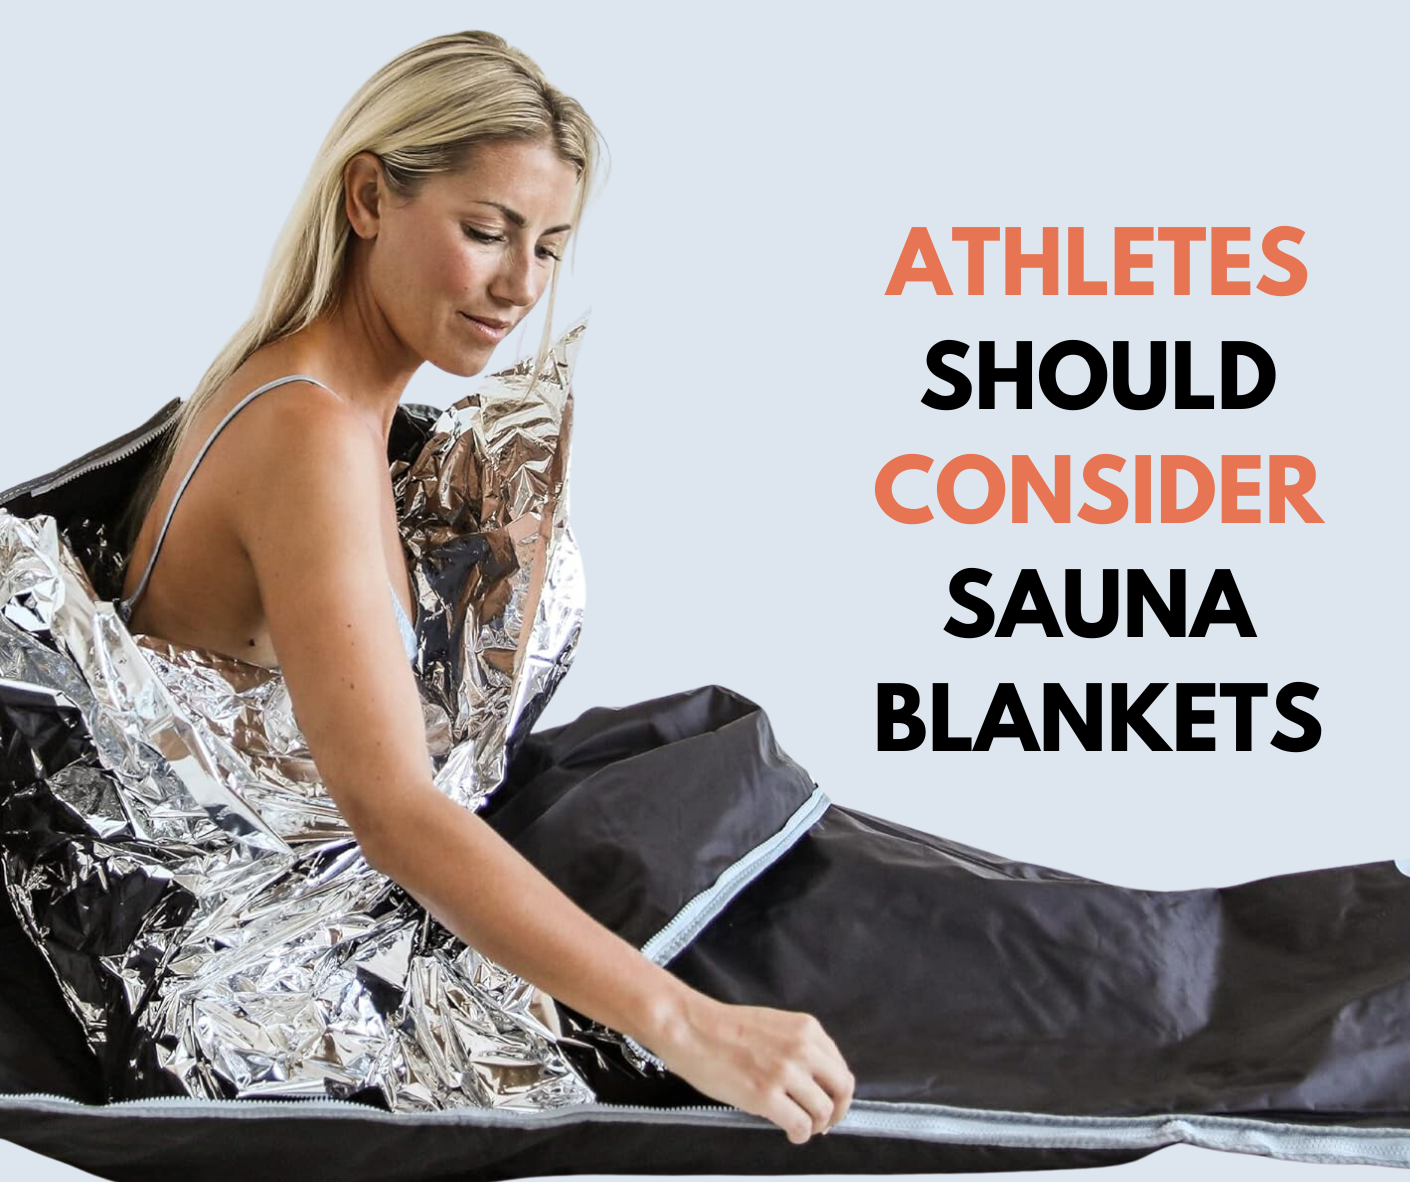 Why Athletes Should Consider Sauna Blankets for Pain Relief